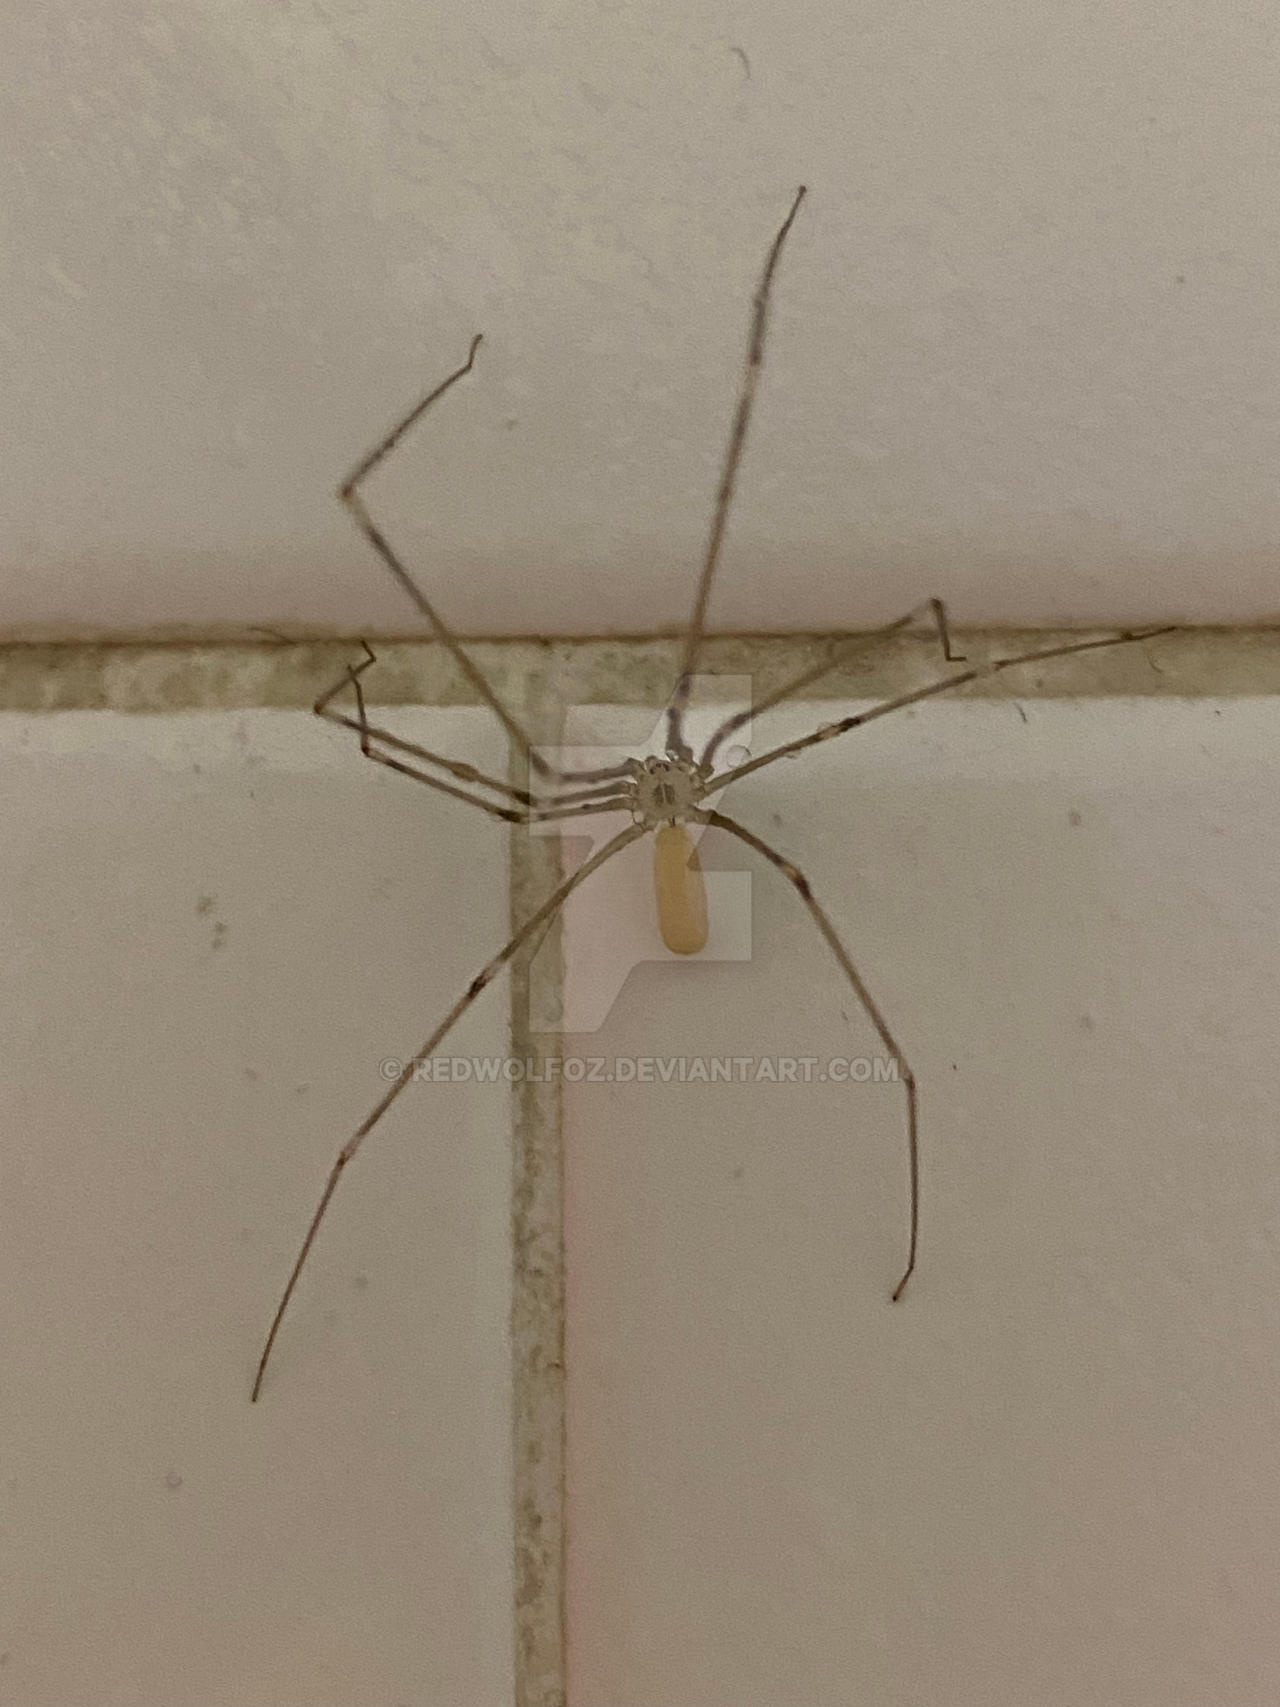 Daddy-long-legs spider (Pholcus phalangioides) - Professional Pest